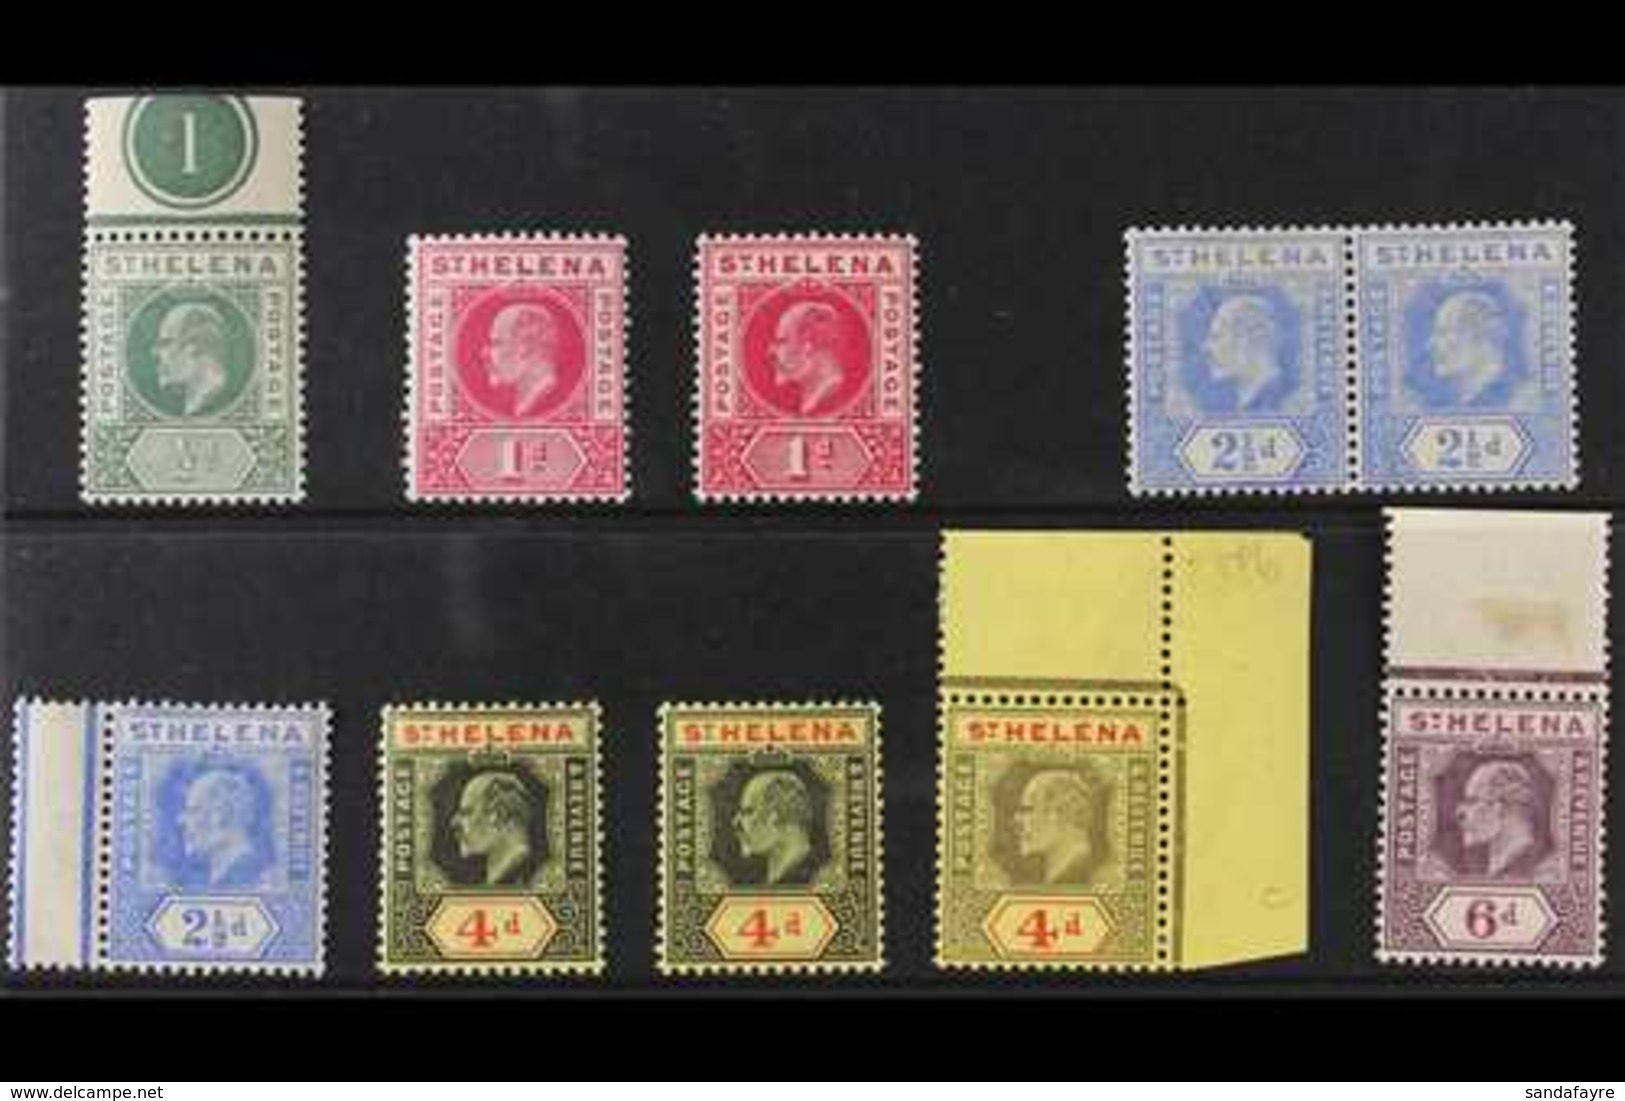 1902-11 NHM DEFINITIVES. An Attractive Selection Of KEVII Definitives Presented On A Stock Card That Includes The 1902 S - Isola Di Sant'Elena